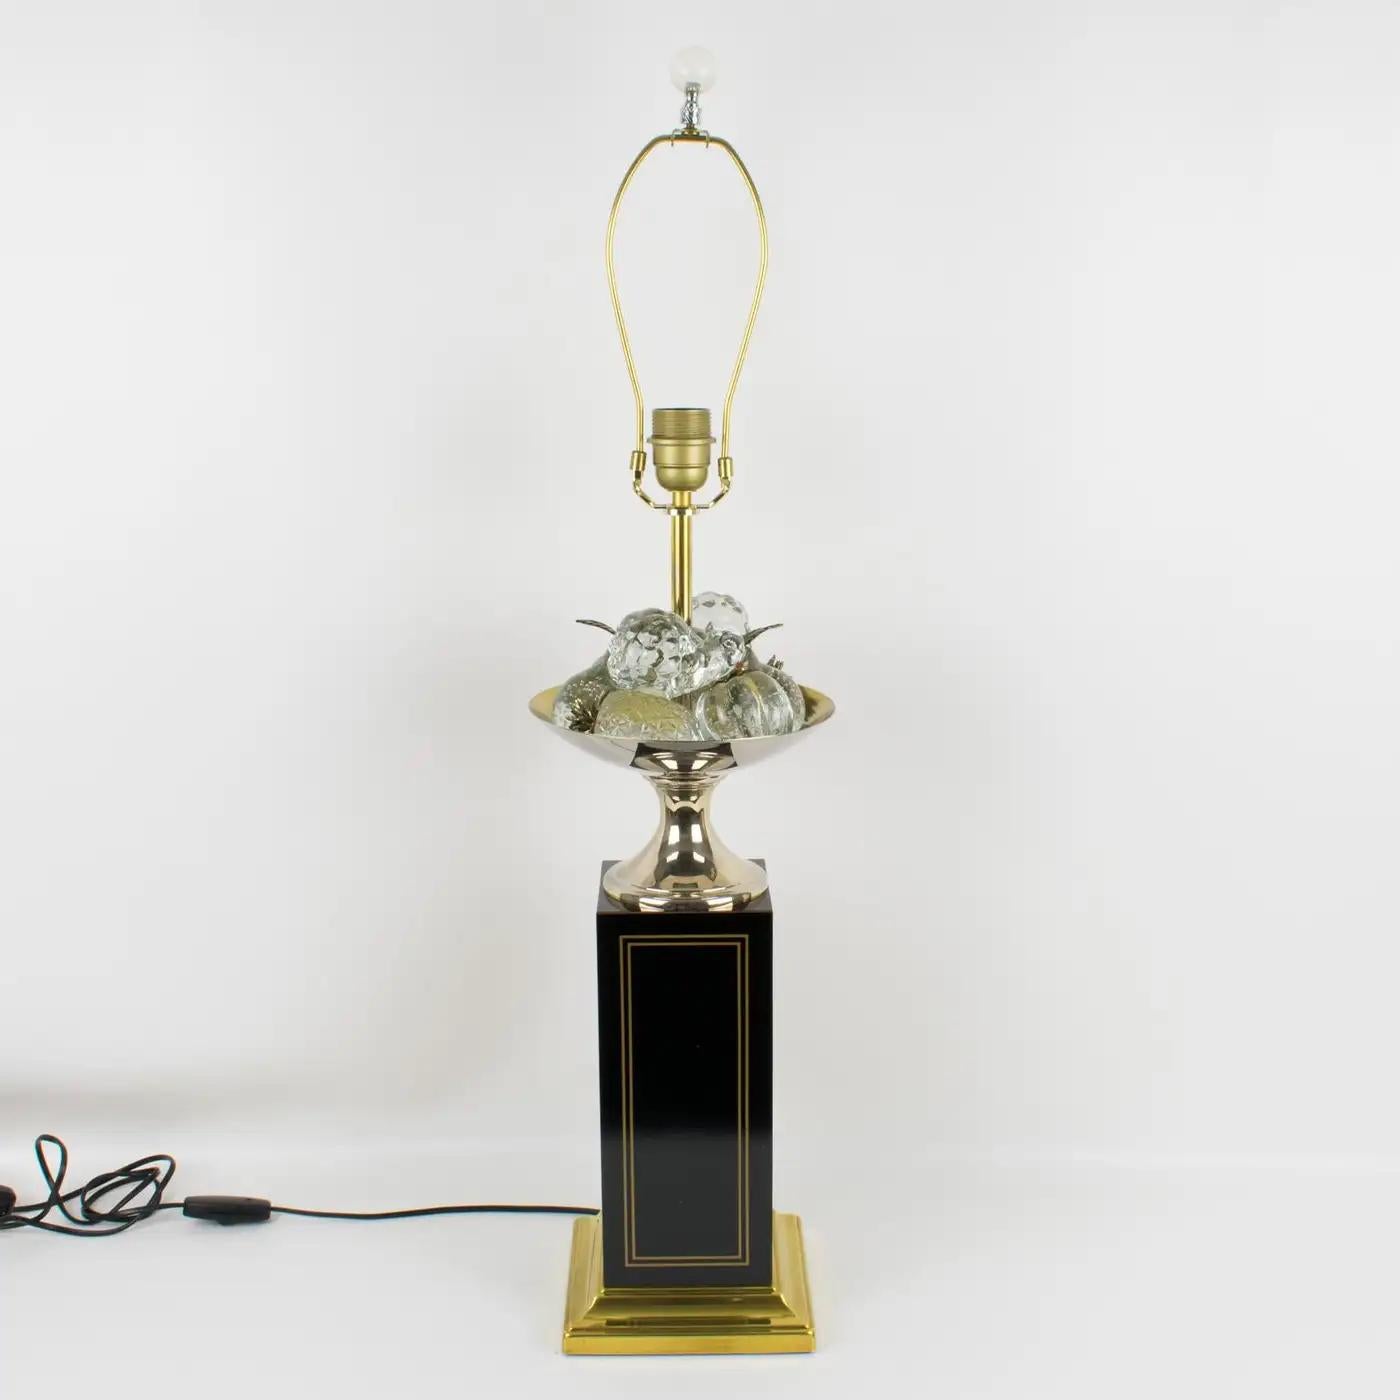 Maison Charles Table Lamp Black Enamel and Crystal Fruits, France 1960s For Sale 3